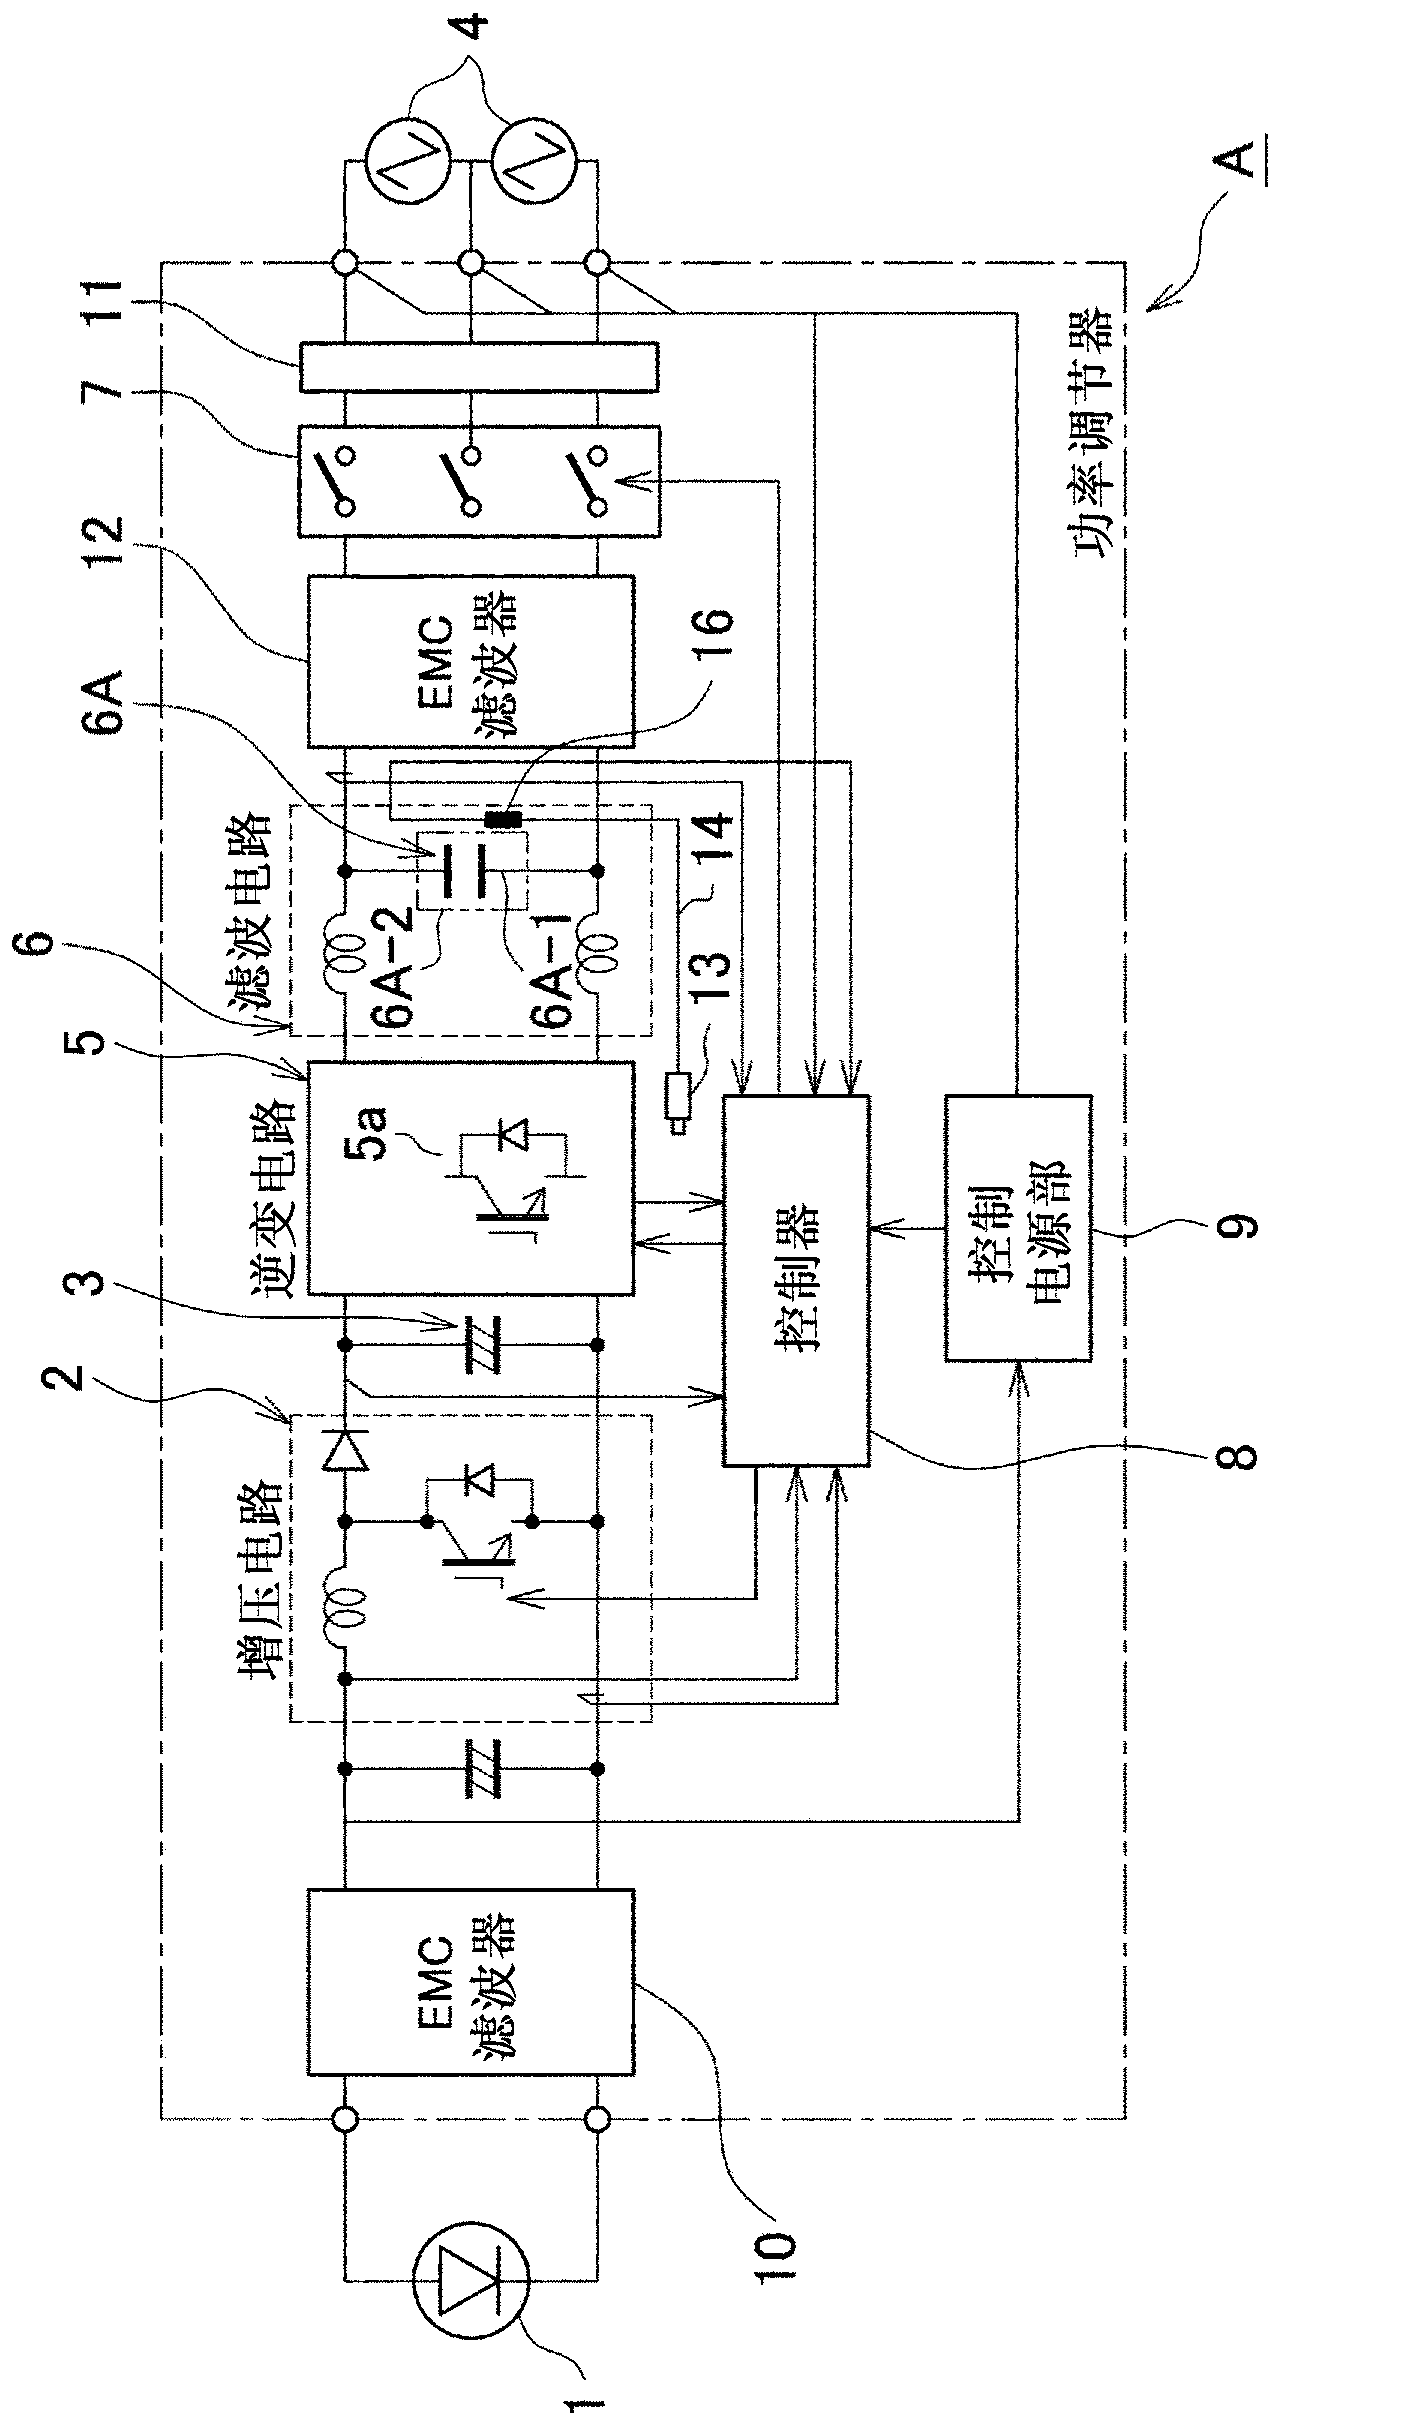 Structure for output-stage film capacitor in power conditioner